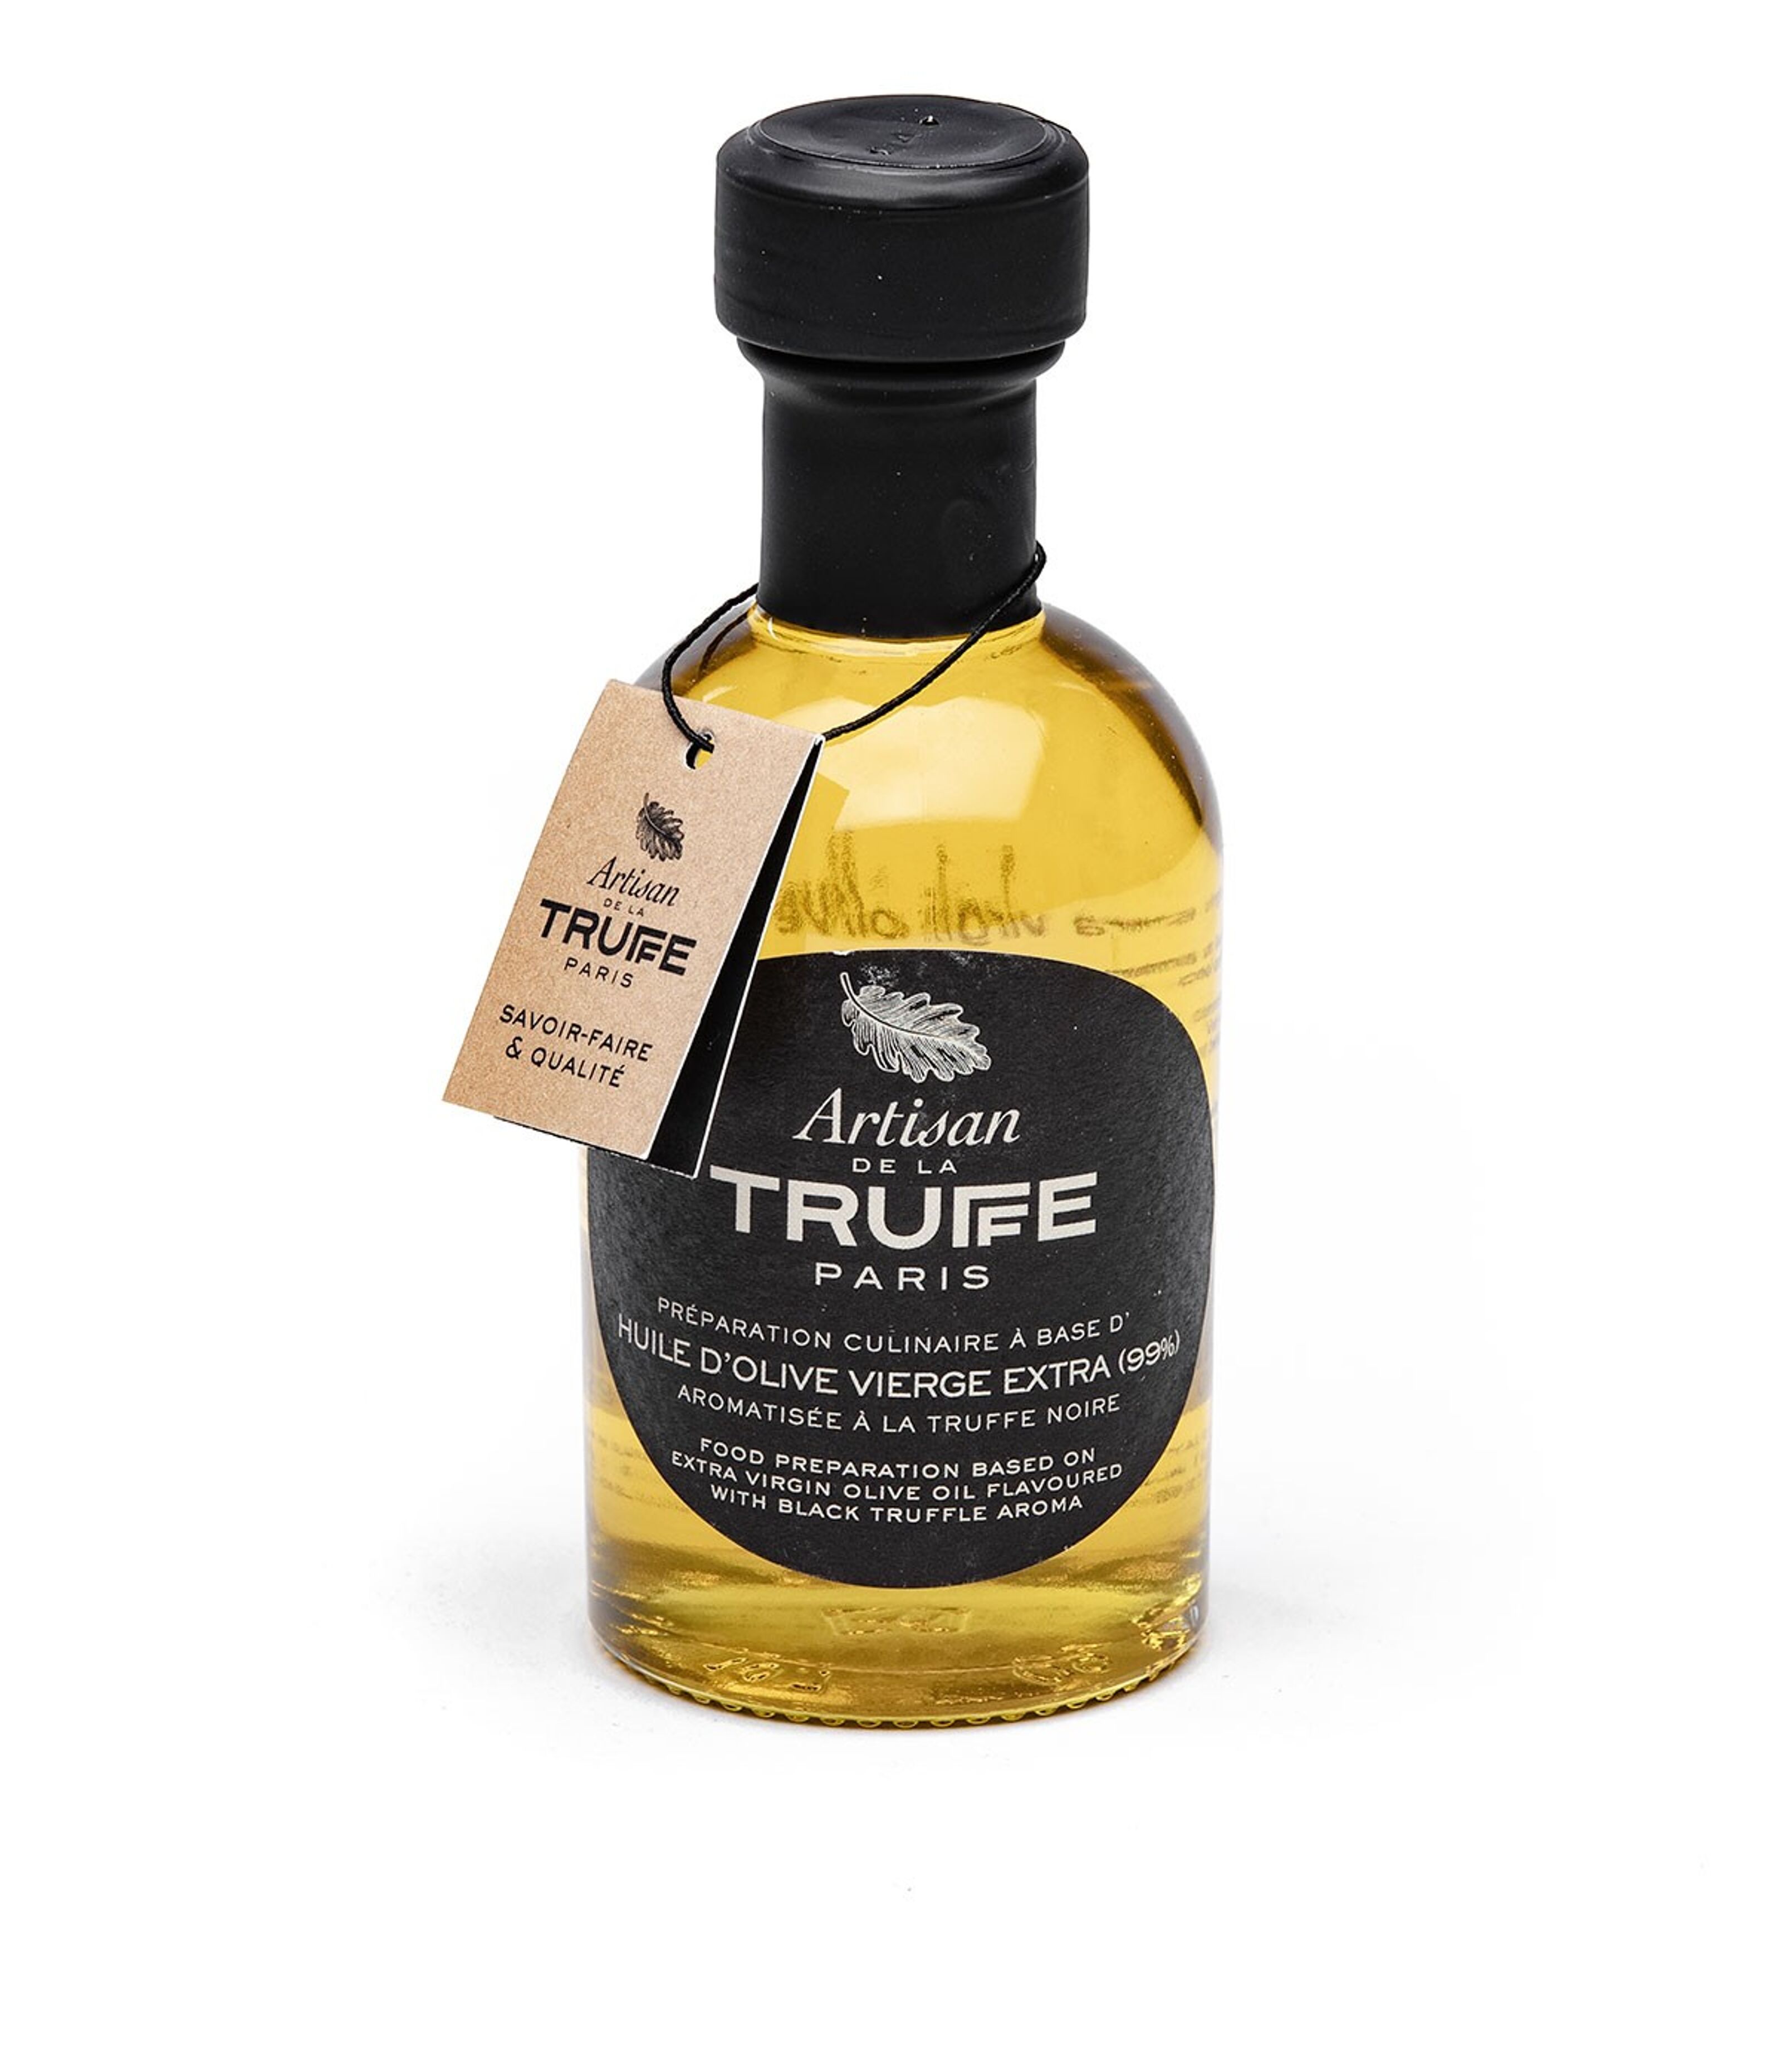 Huile d'olive vierge extra aromatisée truffe noire - 100ml